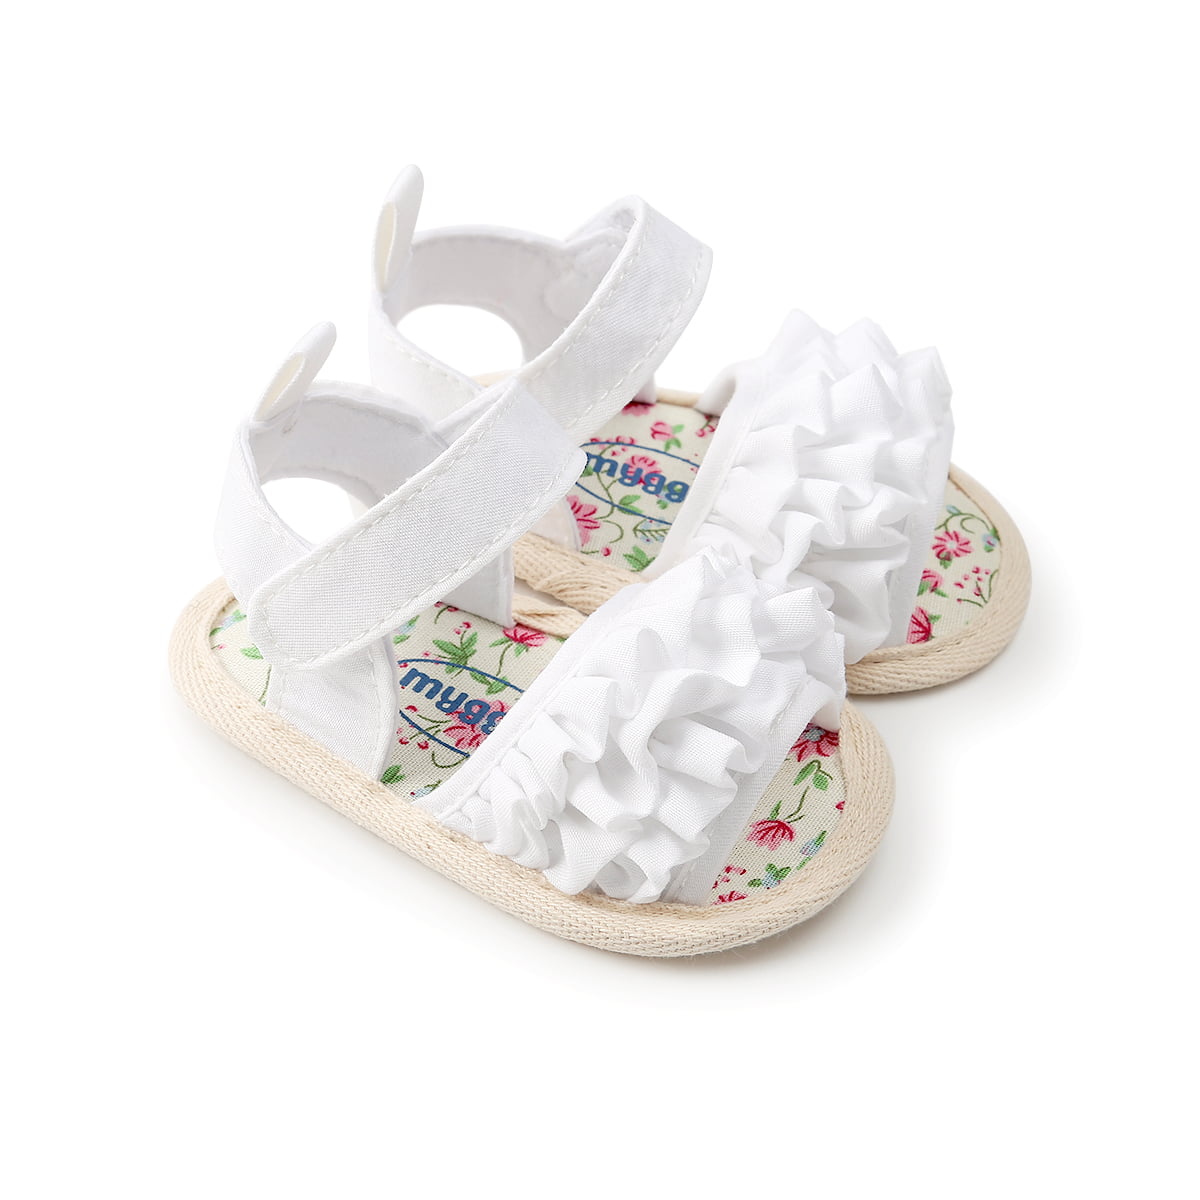 Newborn Infant Baby Girls Canvas Floral Crib Shoes Soft Sole Anti-slip Sneakers 